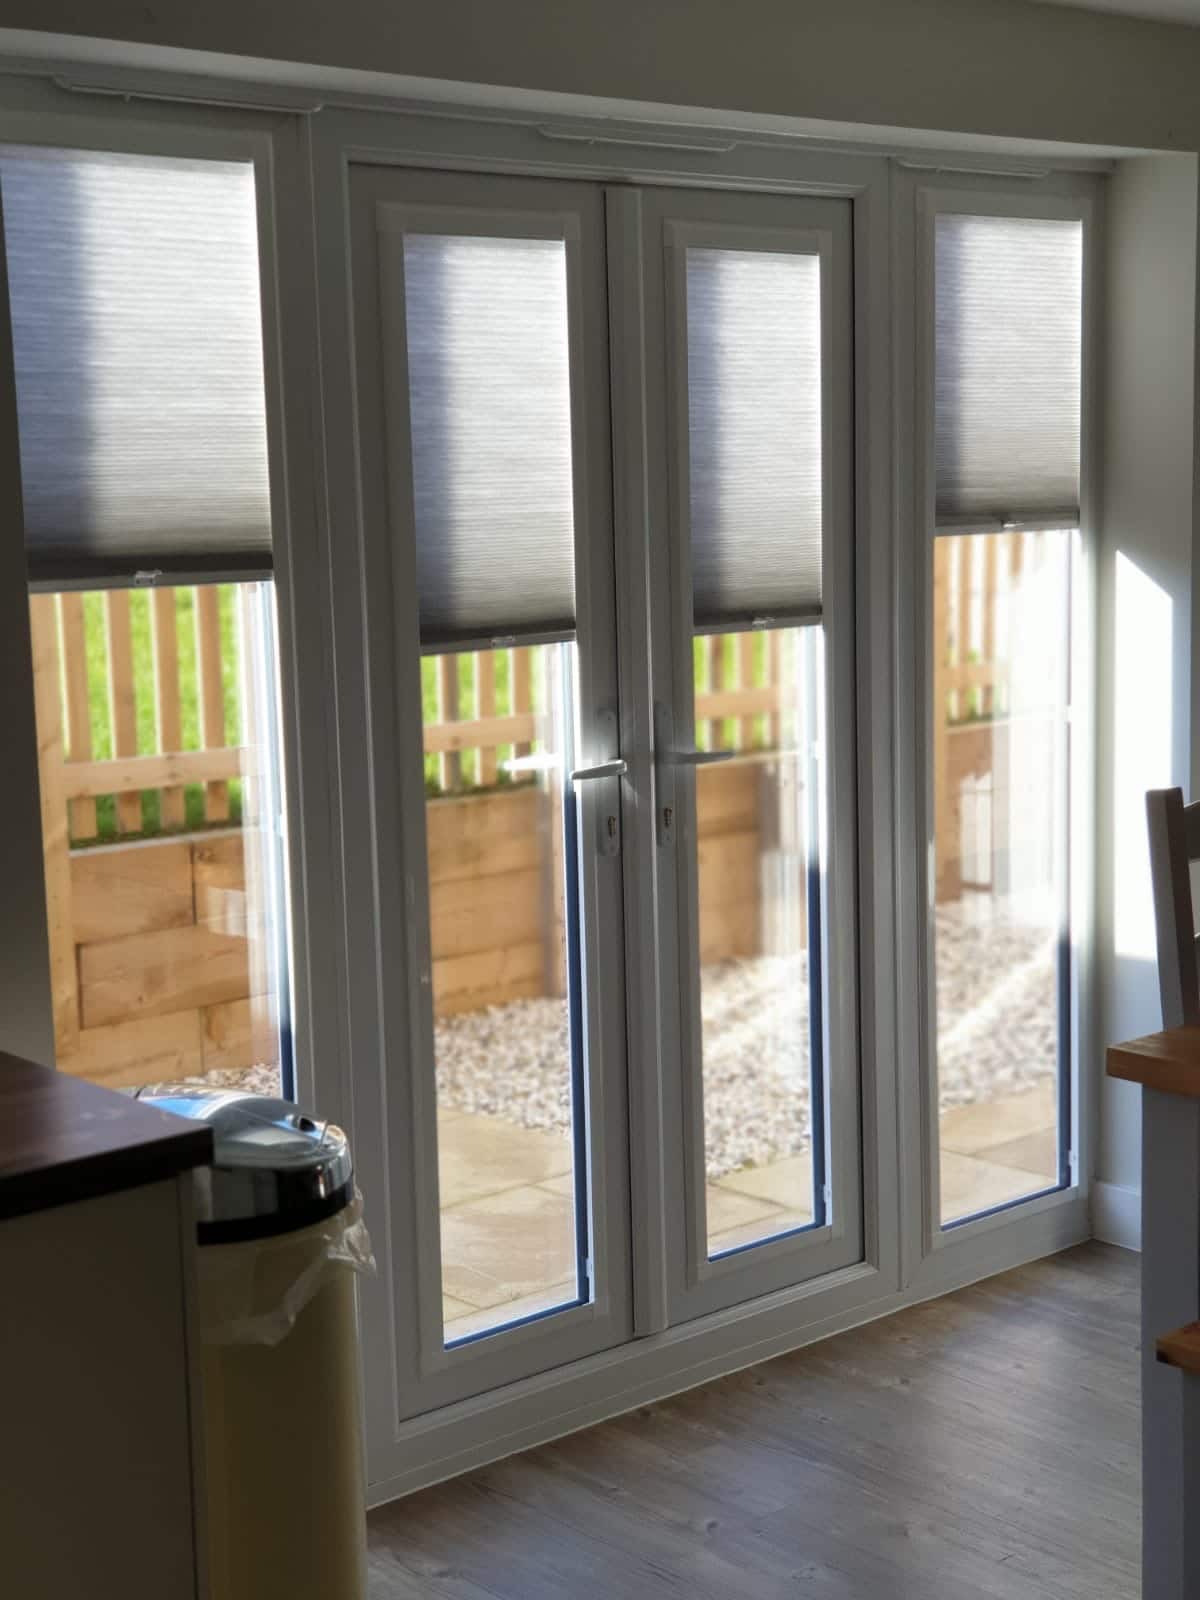 Patio Door Blinds French, Can You Have Perfect Fit Blinds On Sliding Patio Doors